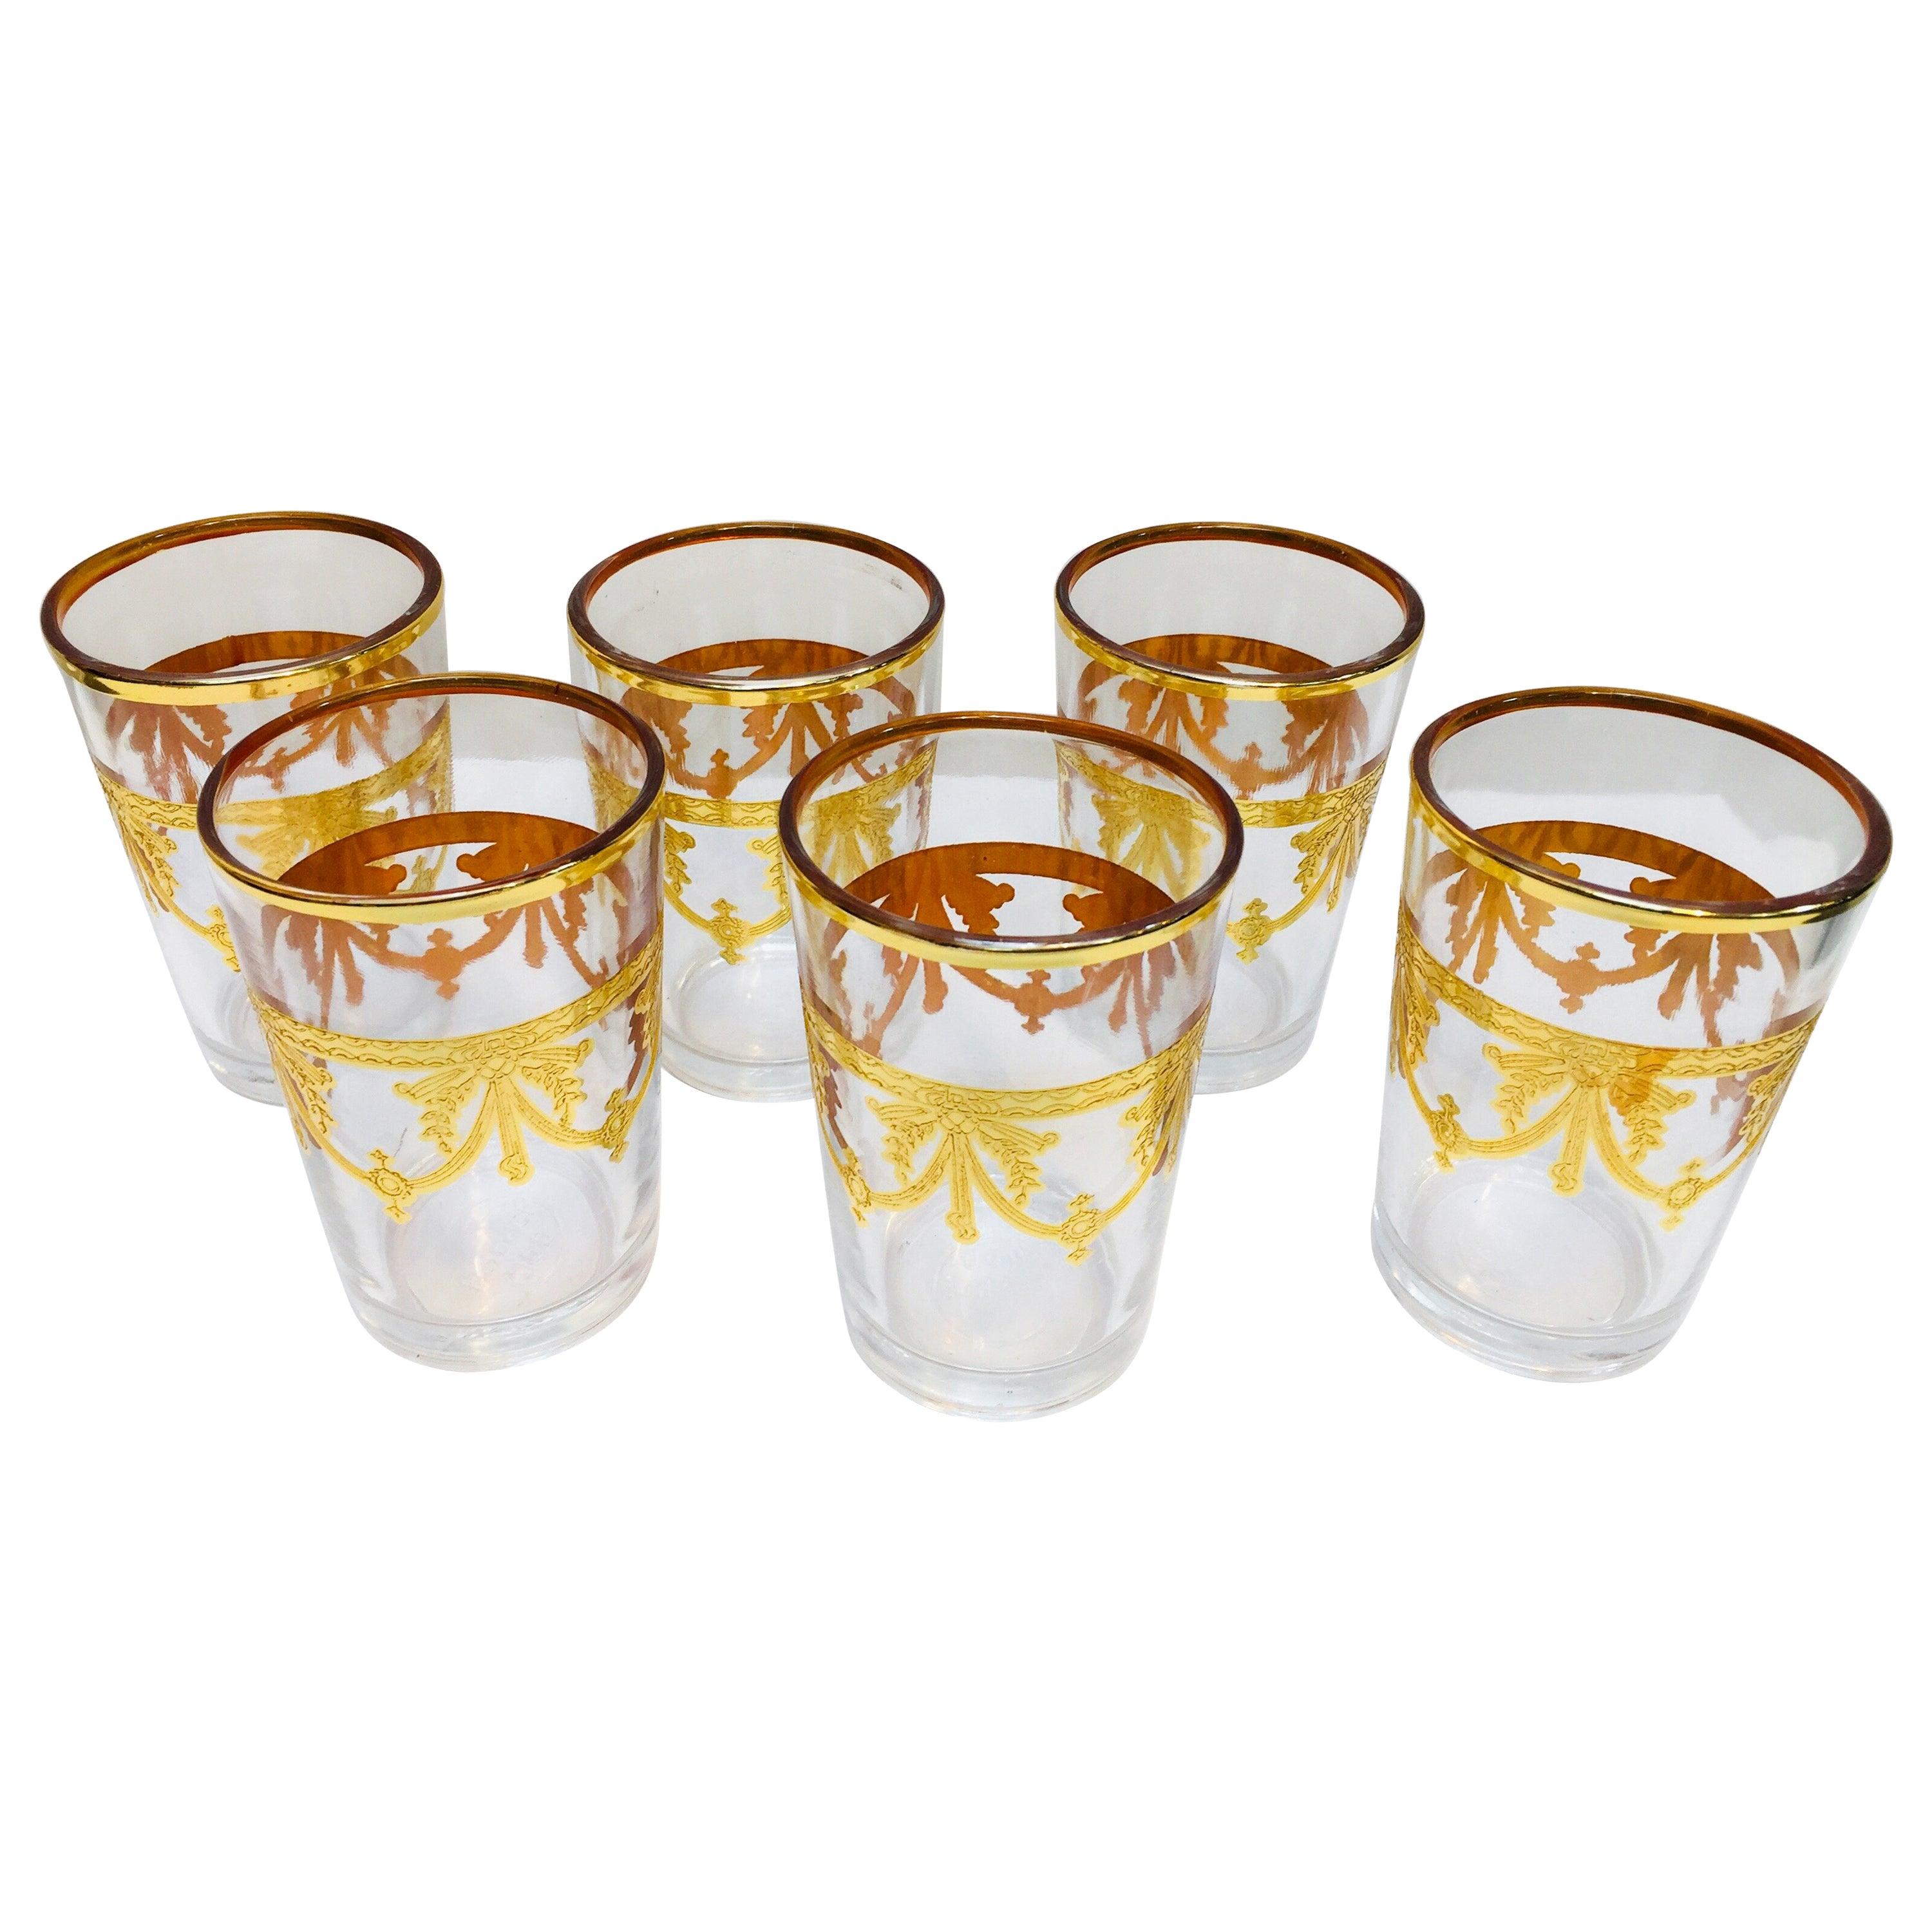 Vintage Set of Eight Culver Highball Glasses with 22-Karat Gold Valencia Design , 5.5 x 2.5 , f_13238991 , Price: $650
Culver Highball Green Glasses with 22-Karat Gold Prado Design , 5.5 x 2.75 , f_21582702 , Price: $650
Georges Briard Set of Six